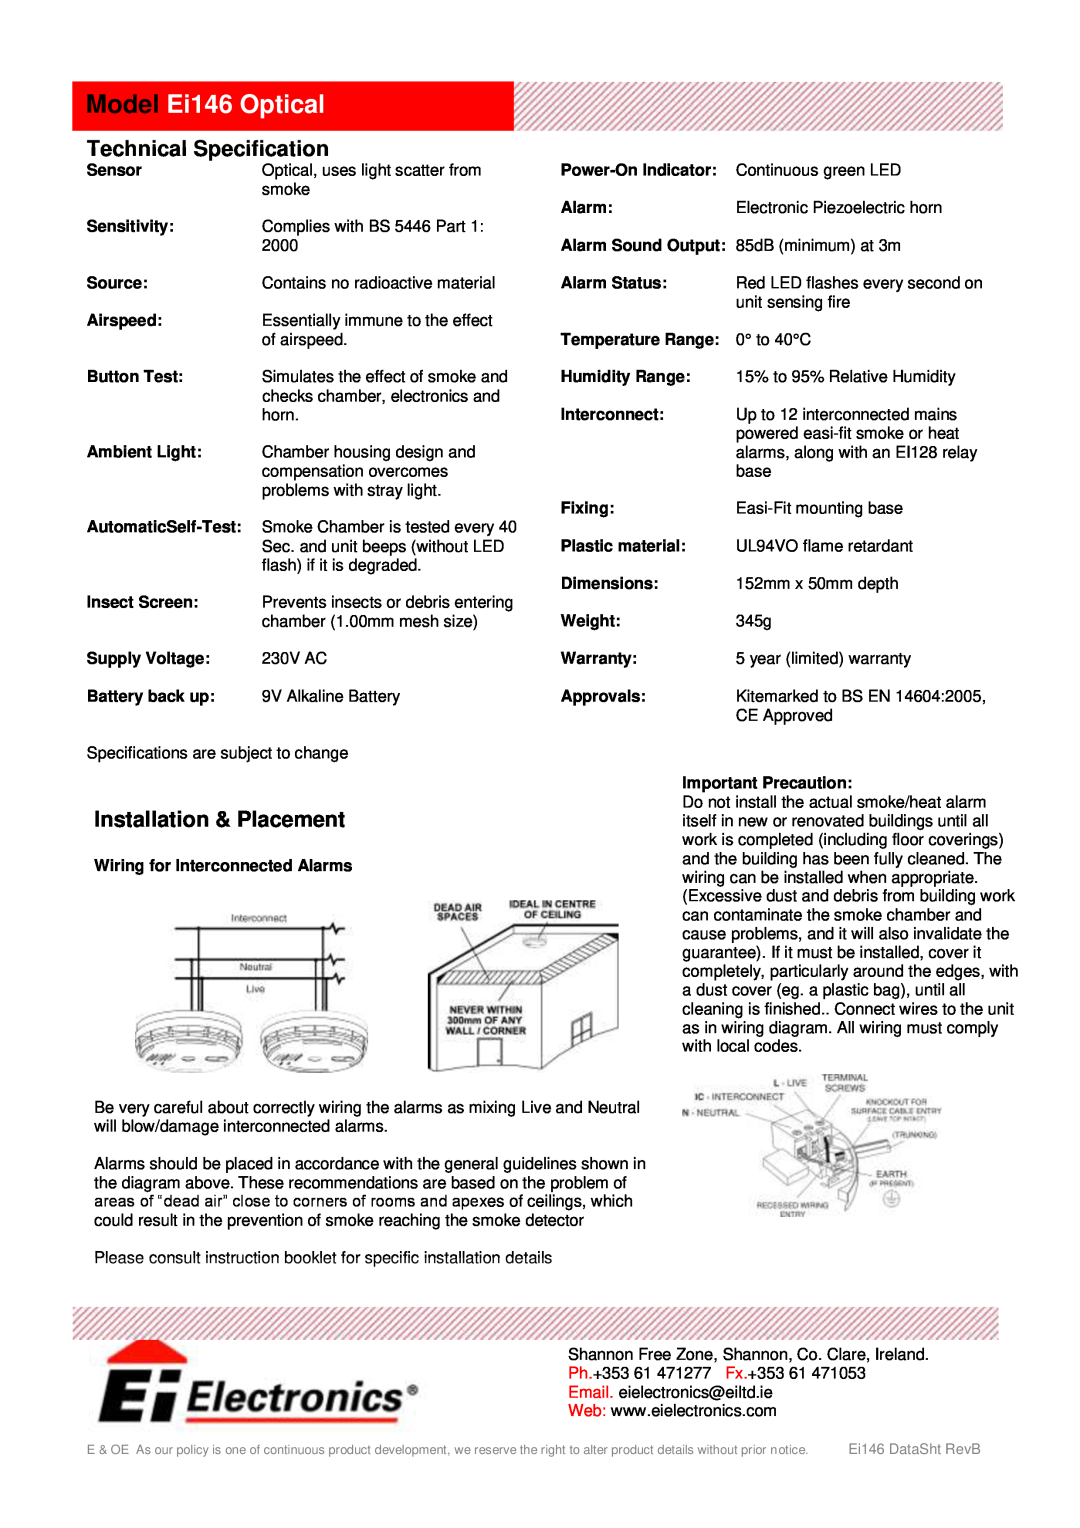 Ei Electronics manual Technical Specification, Installation & Placement, Model Ei146 Optical 